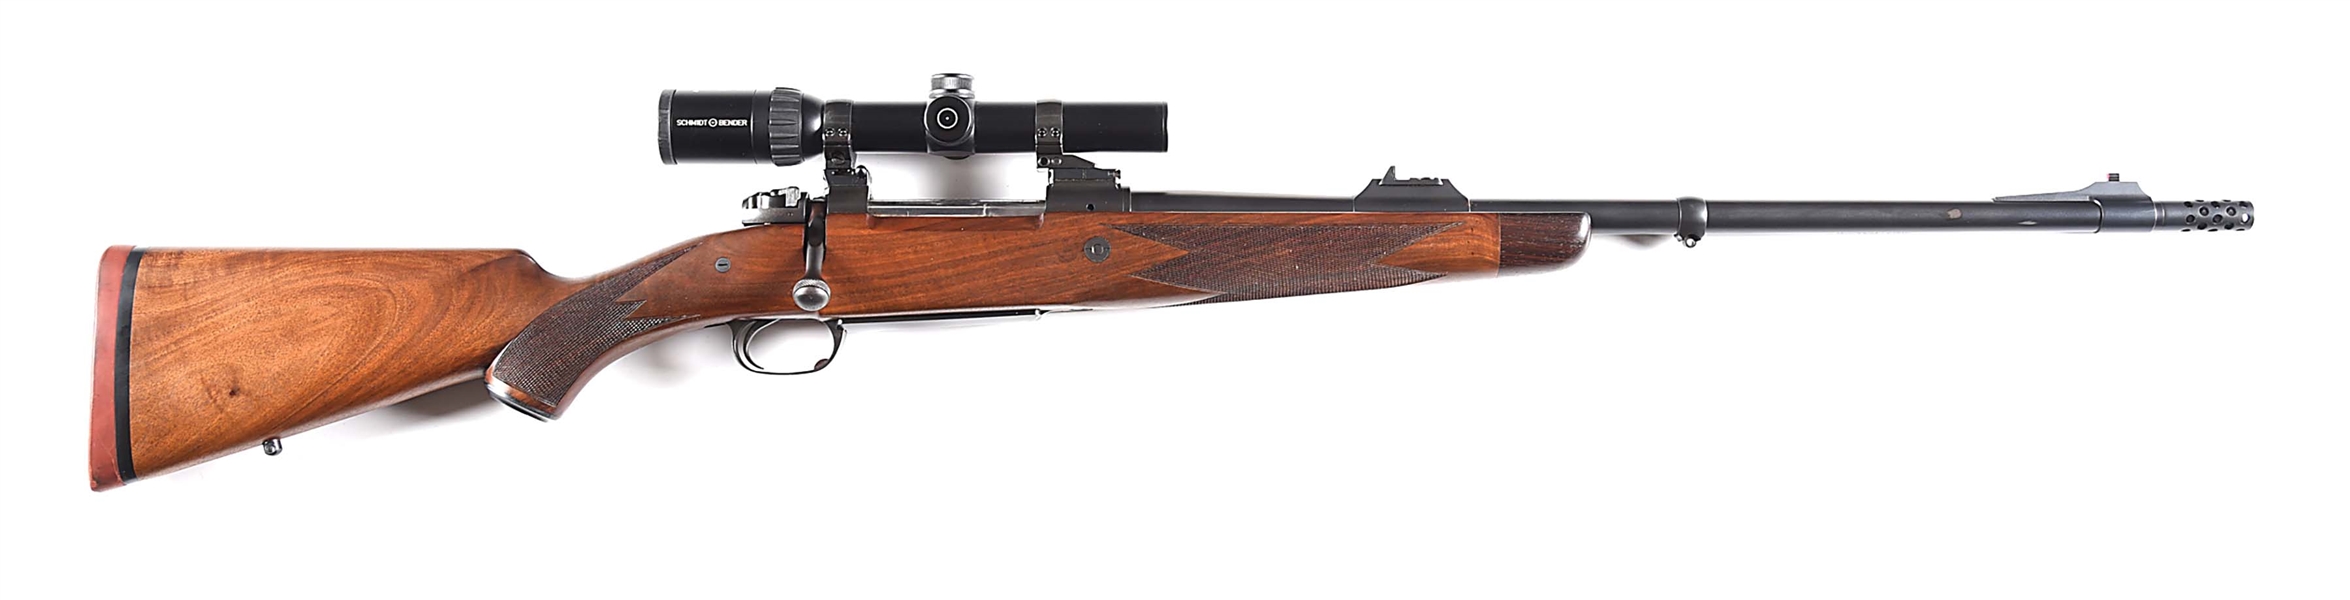 (M) HEYM EXPRESS MAGNUM BOLT ACTION RIFLE IN .416 RIGBY.